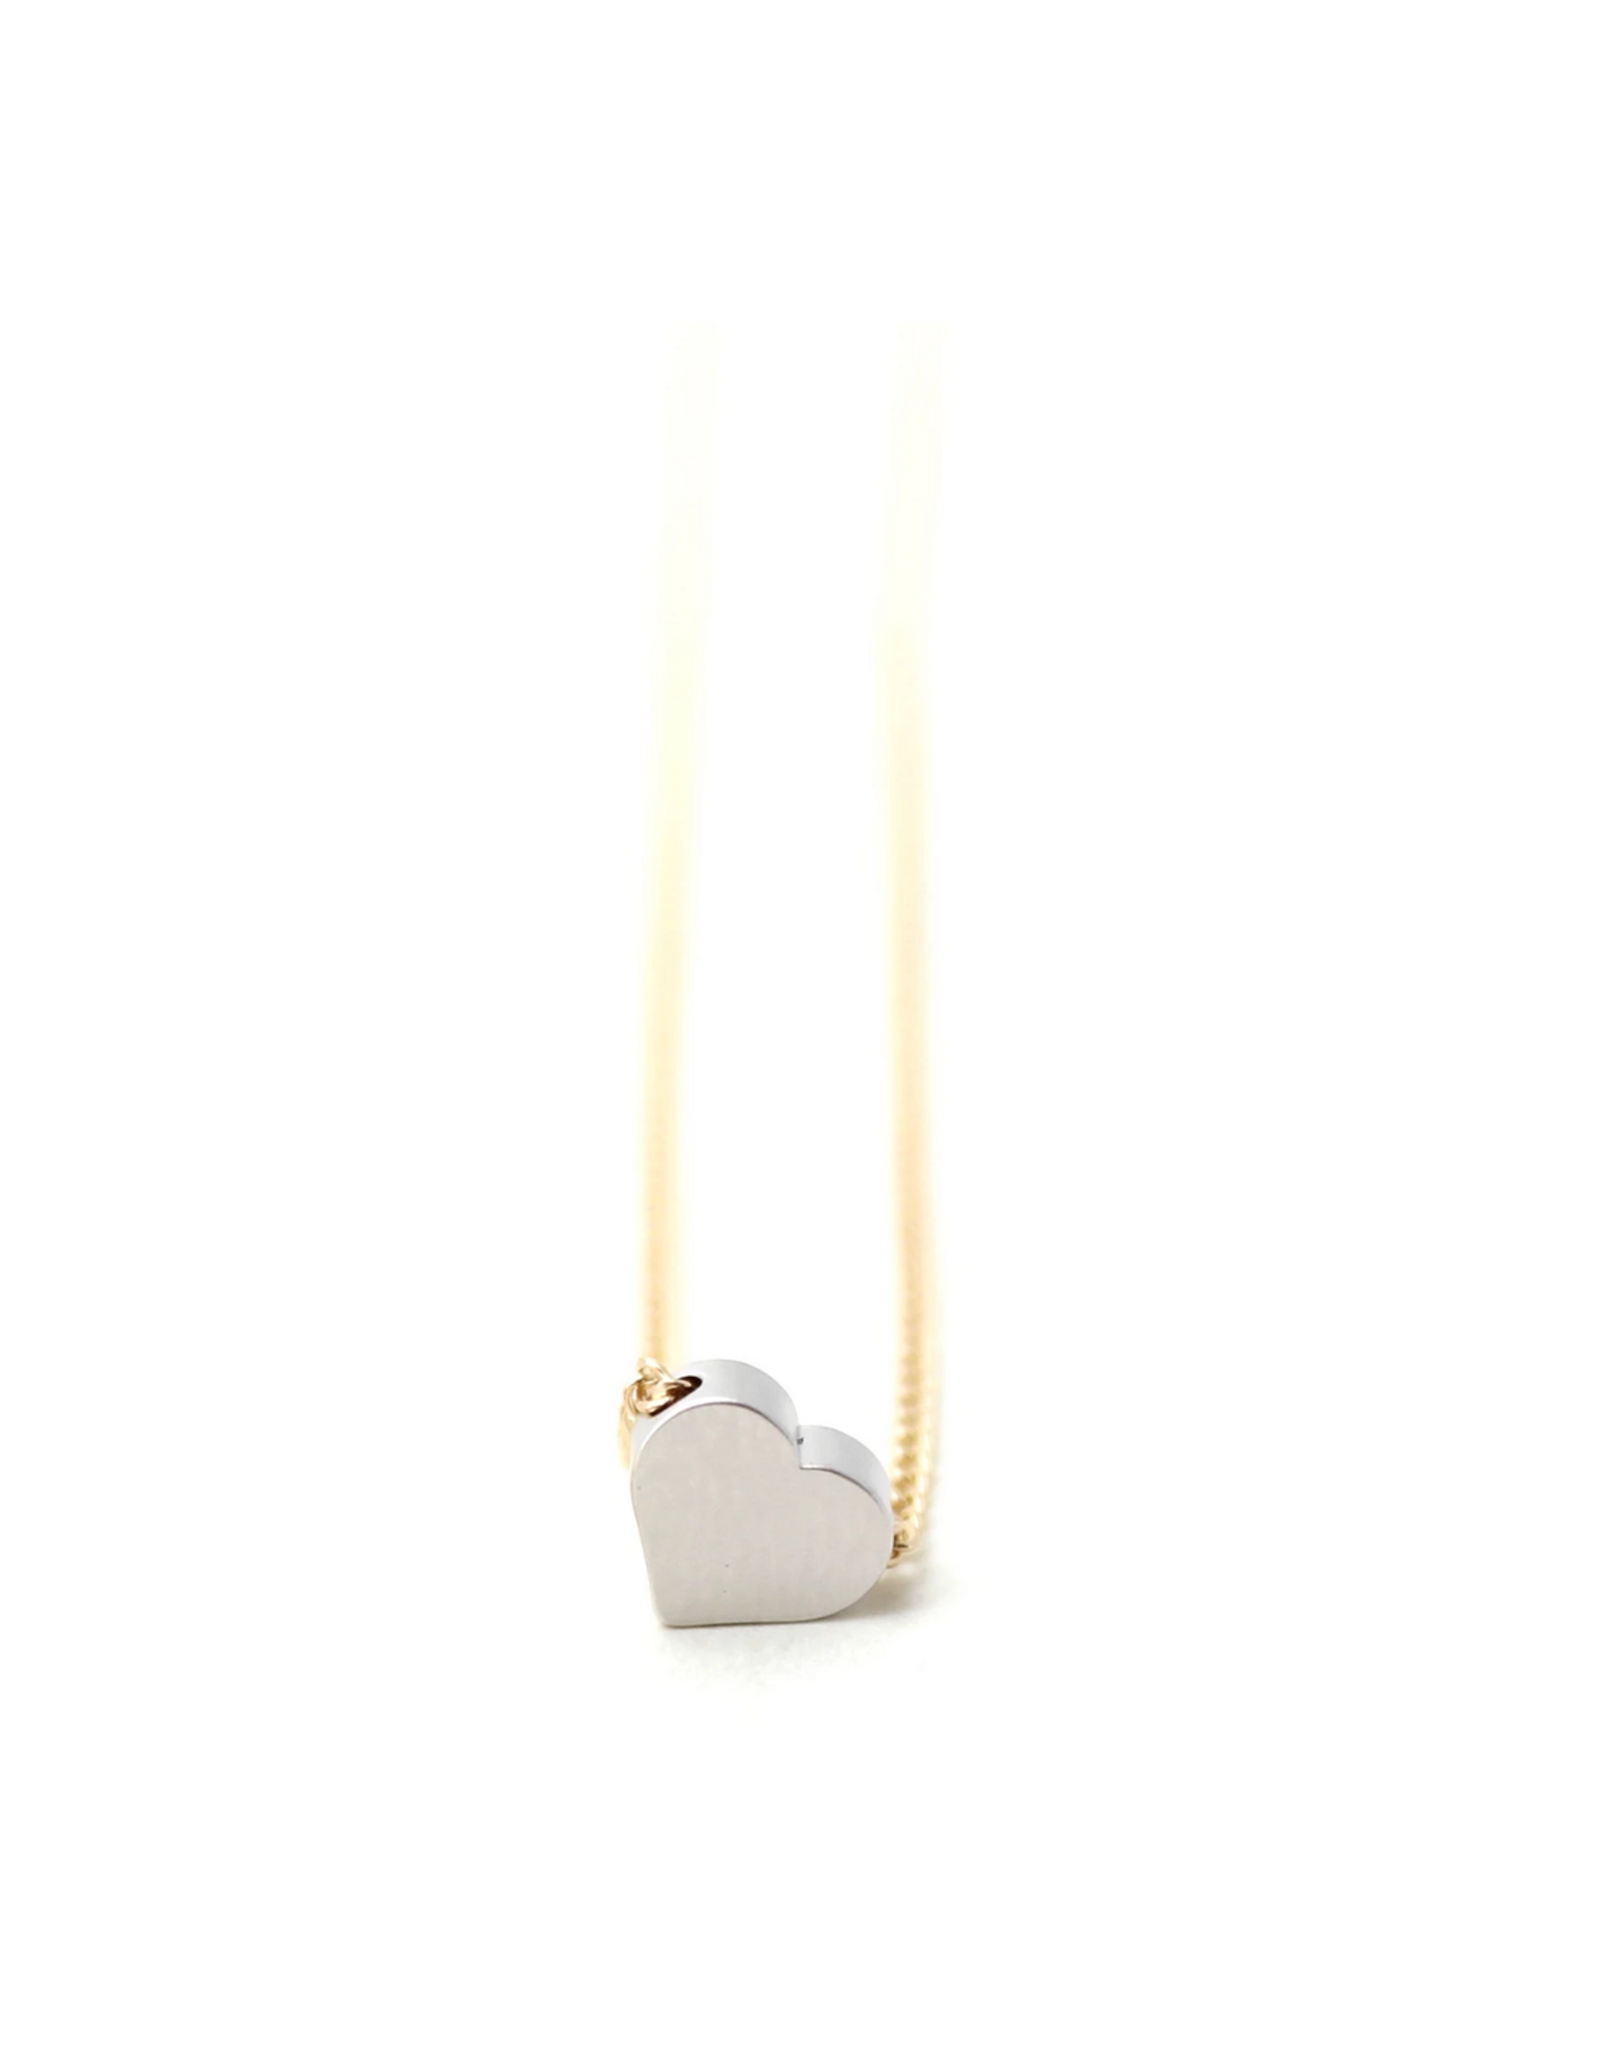 Crafts & Love Tiny Heart Necklace - Silver Heart, Gold Chain